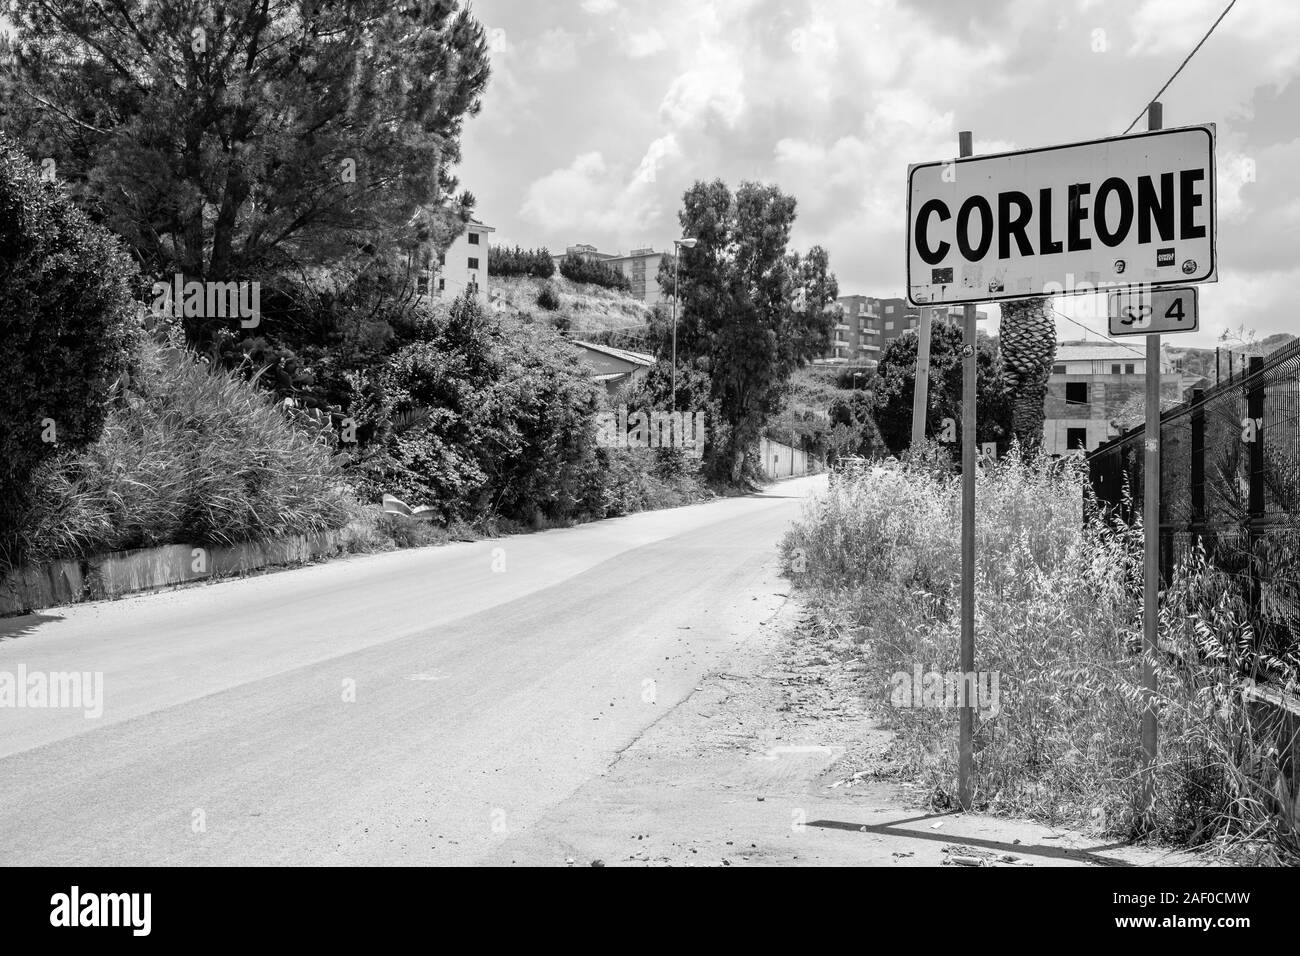 Corleone is a town in Sicily that became famous after the novels by Mario Puzo and the movies about the Godfather Stock Photo